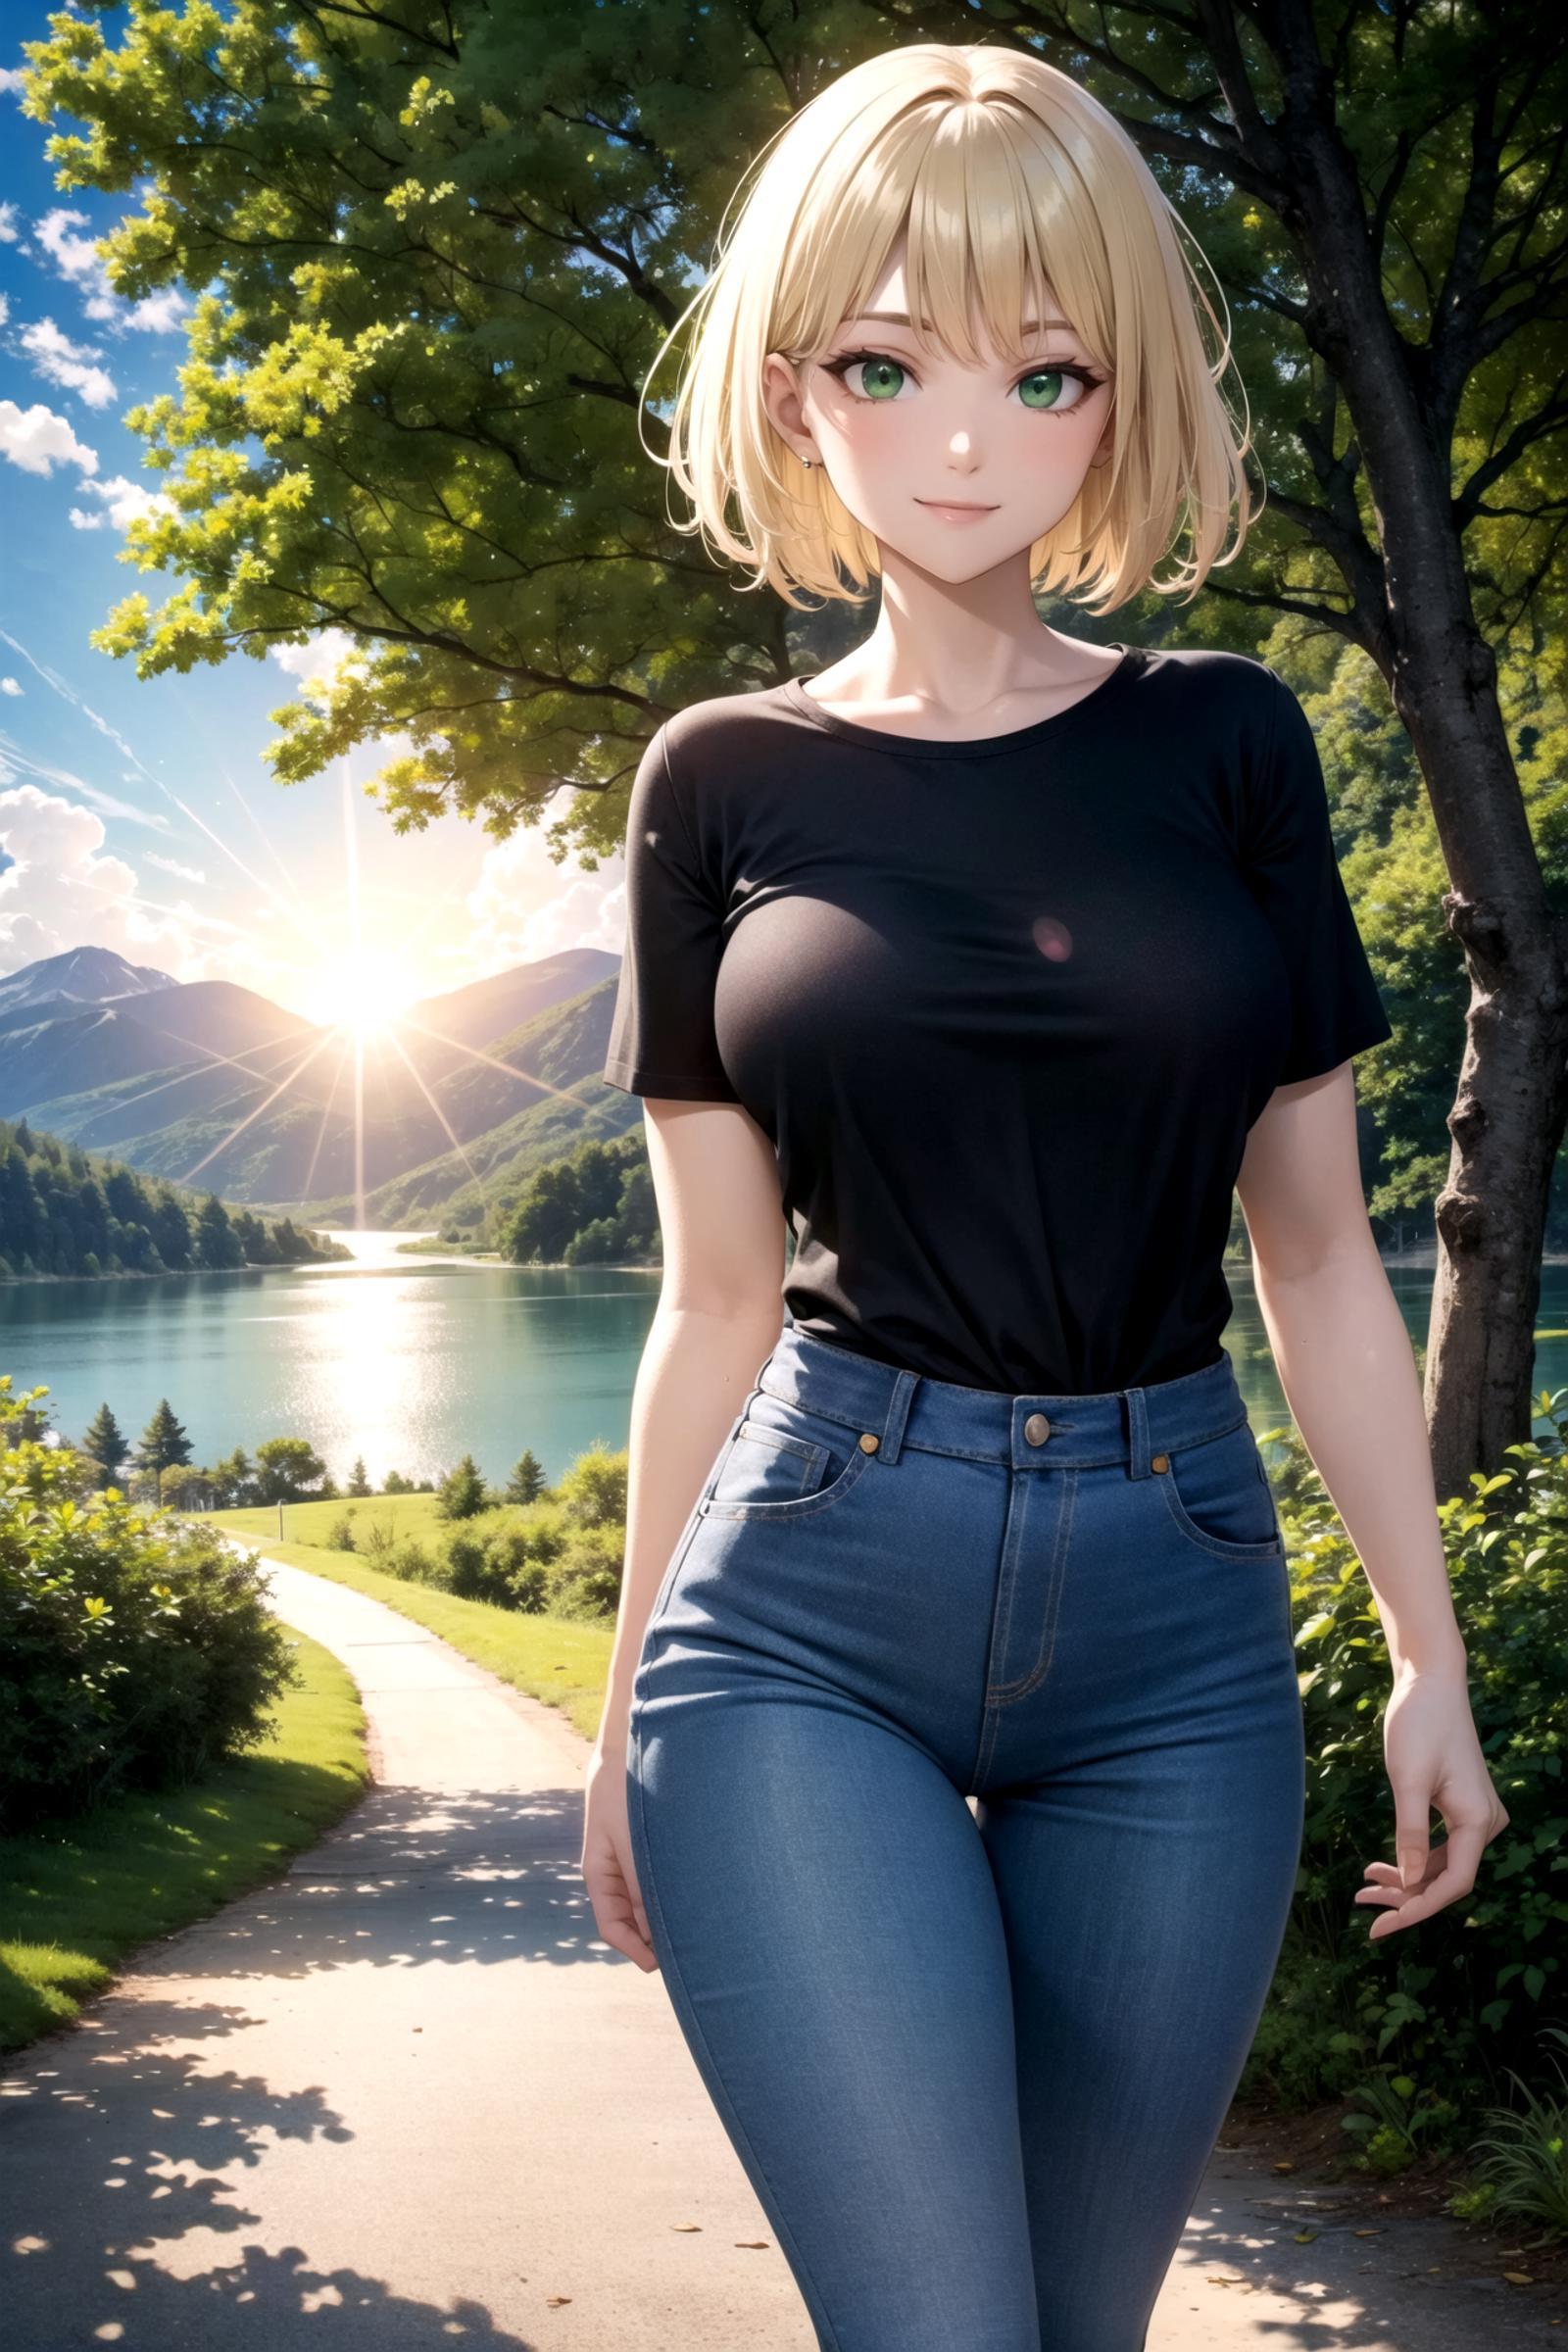 Anime girl with green eyes standing near a lake.